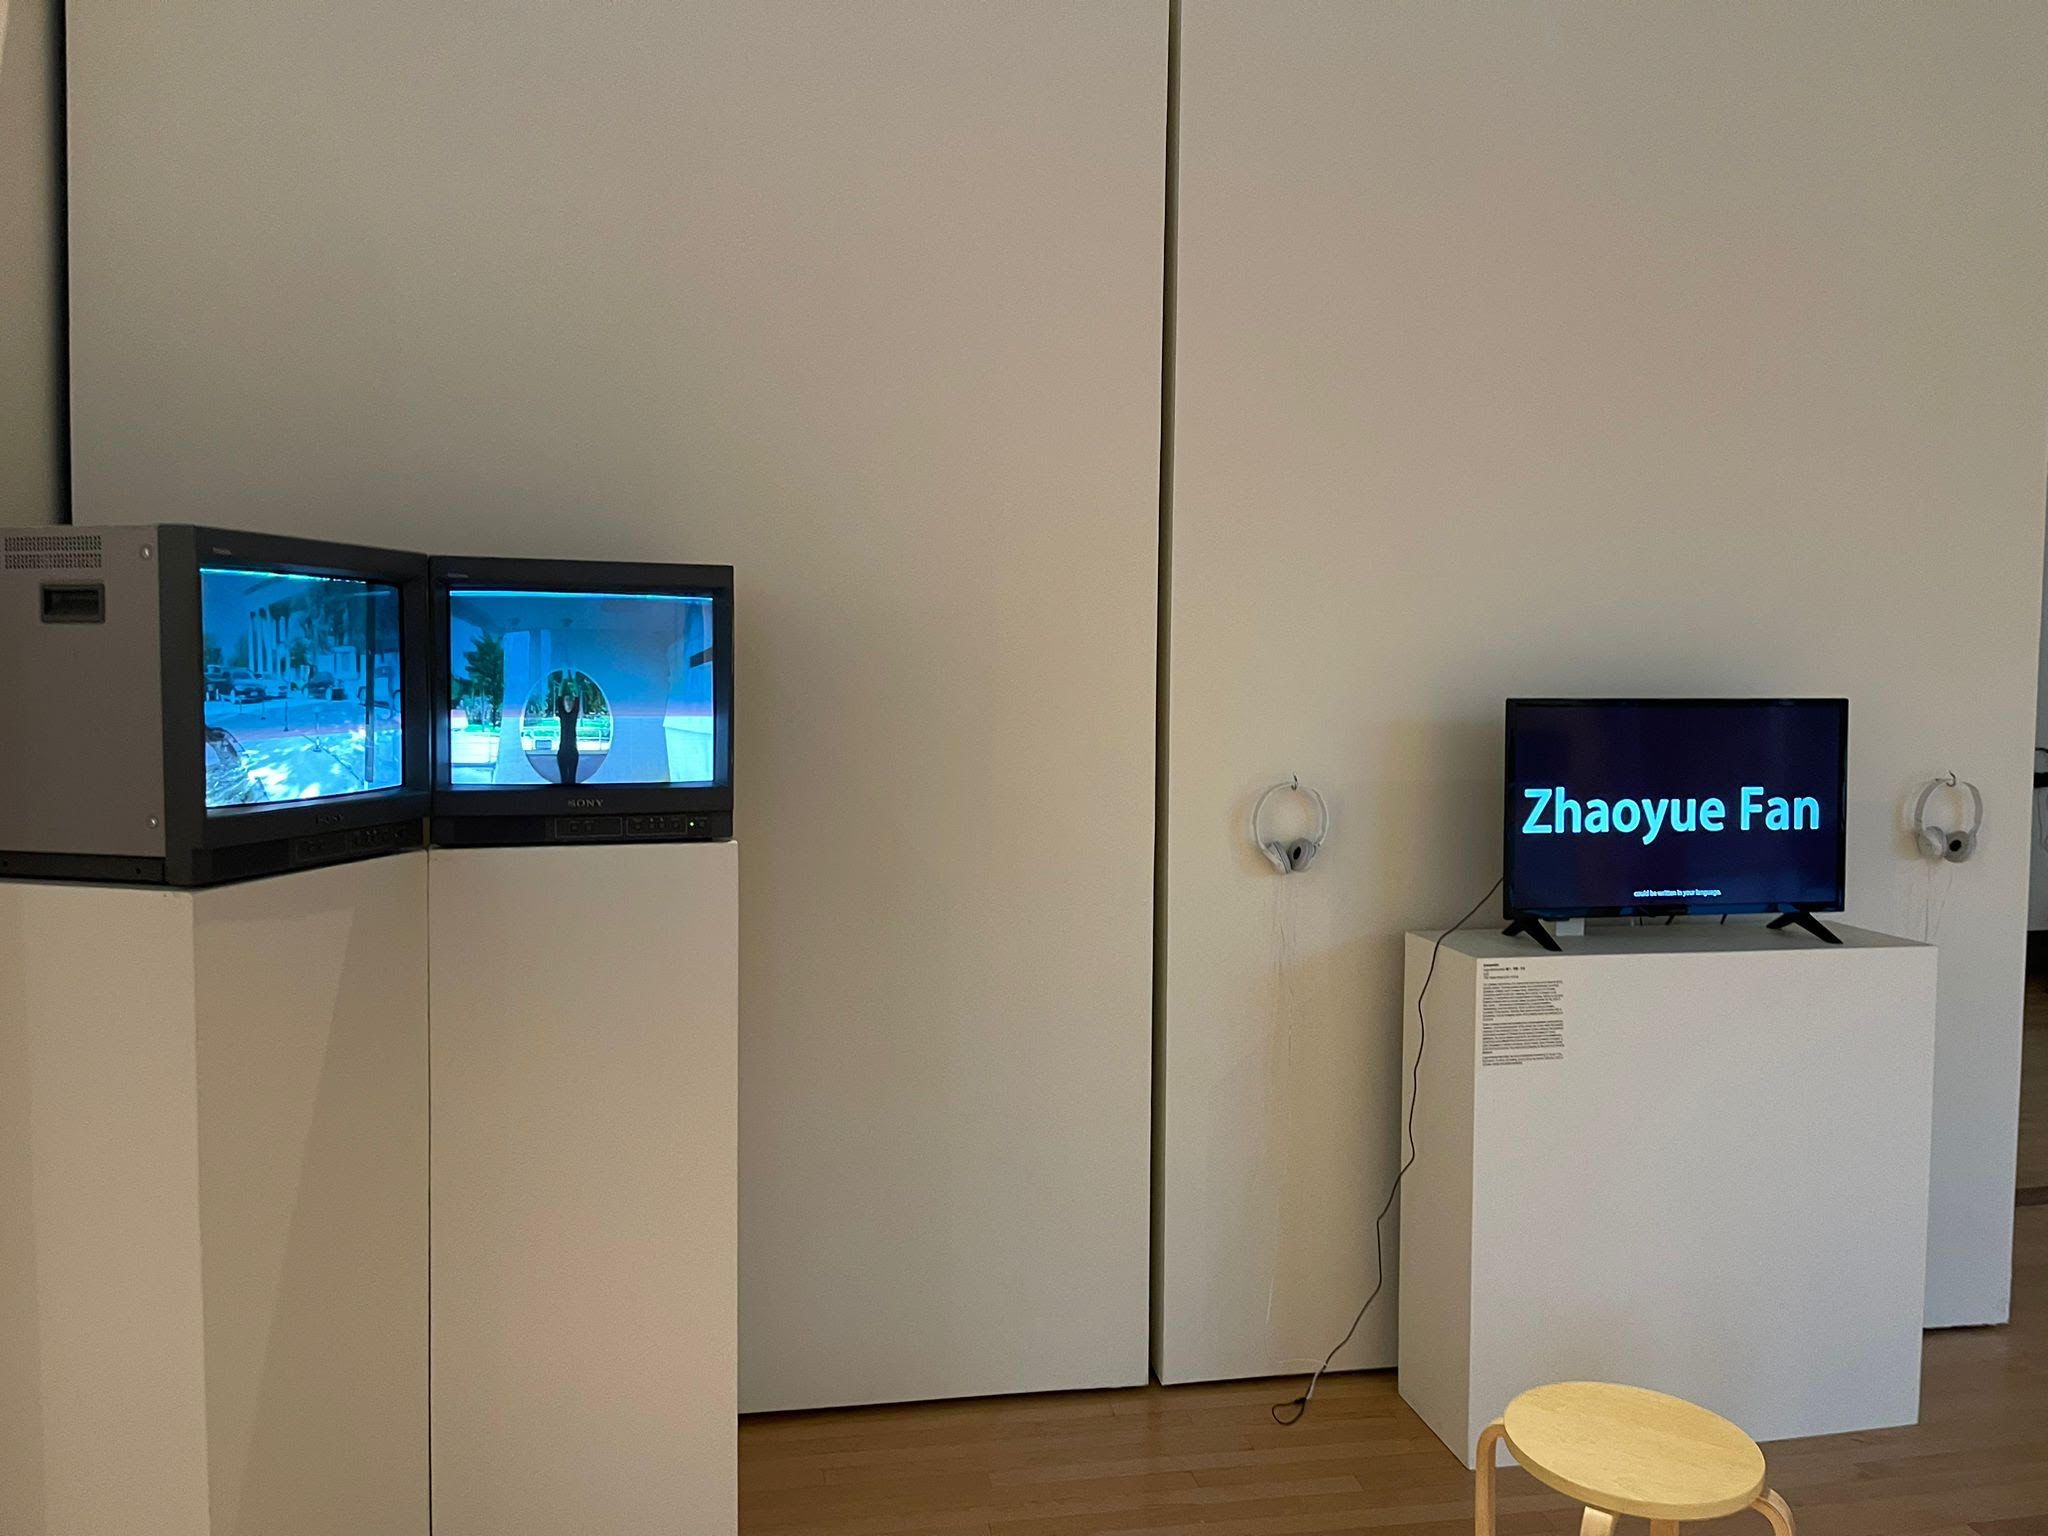 Two screens play video. One is glitched like an old VHS, and one reads "zhaoyuefan"